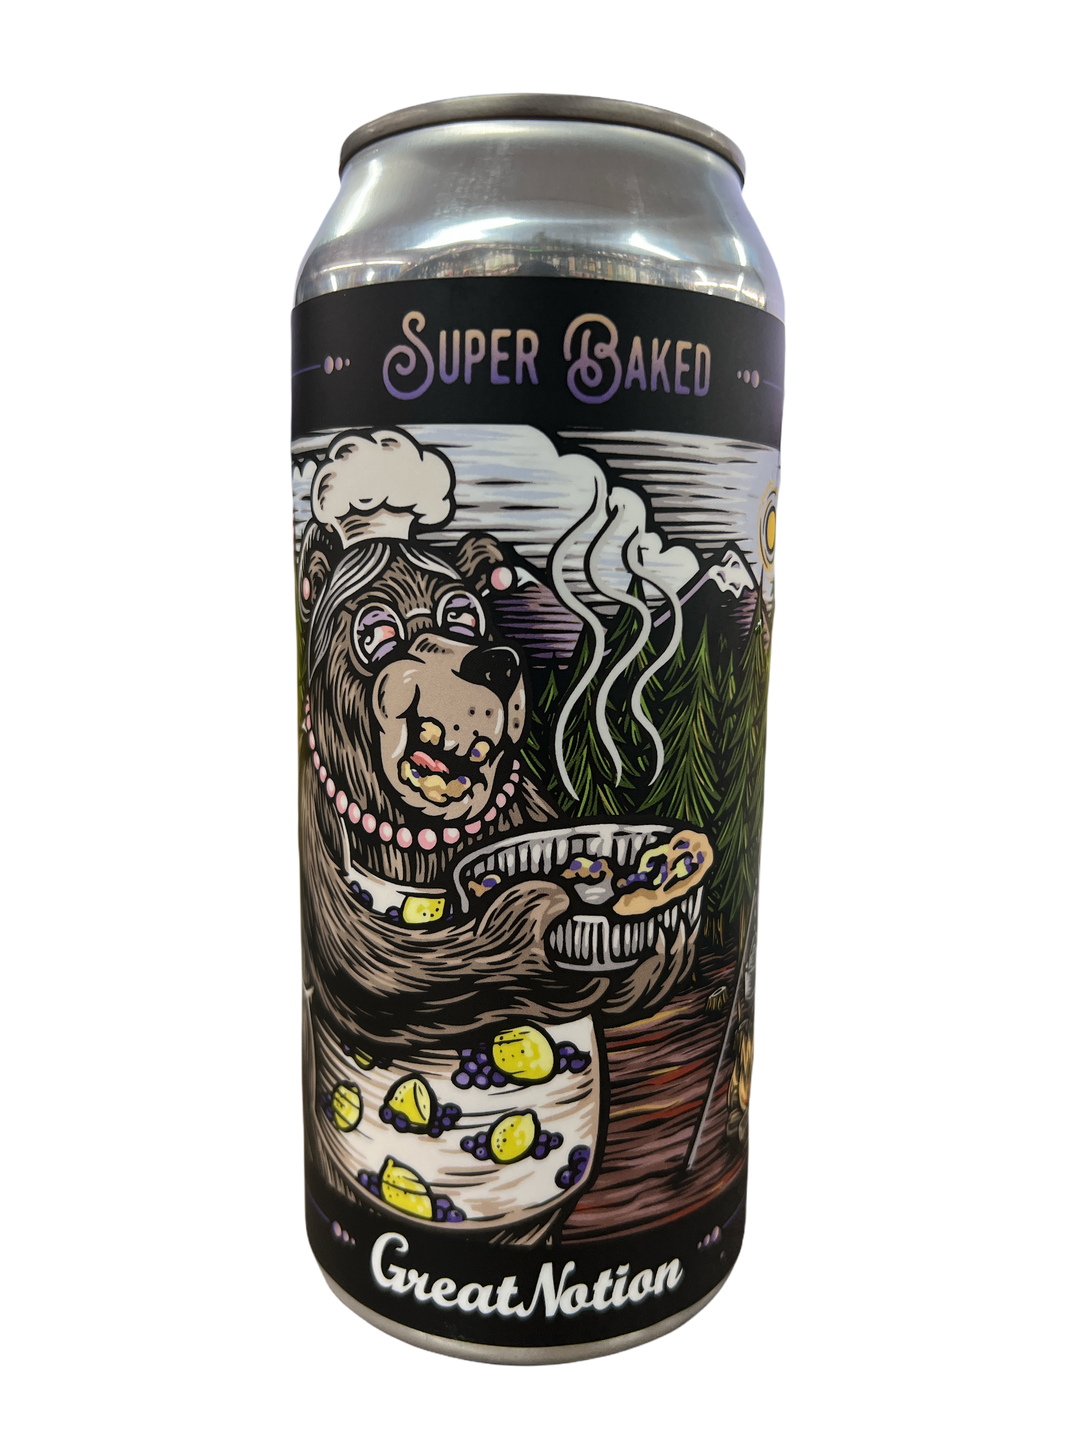 Buy Great Notion Super Baked Online -Craft City